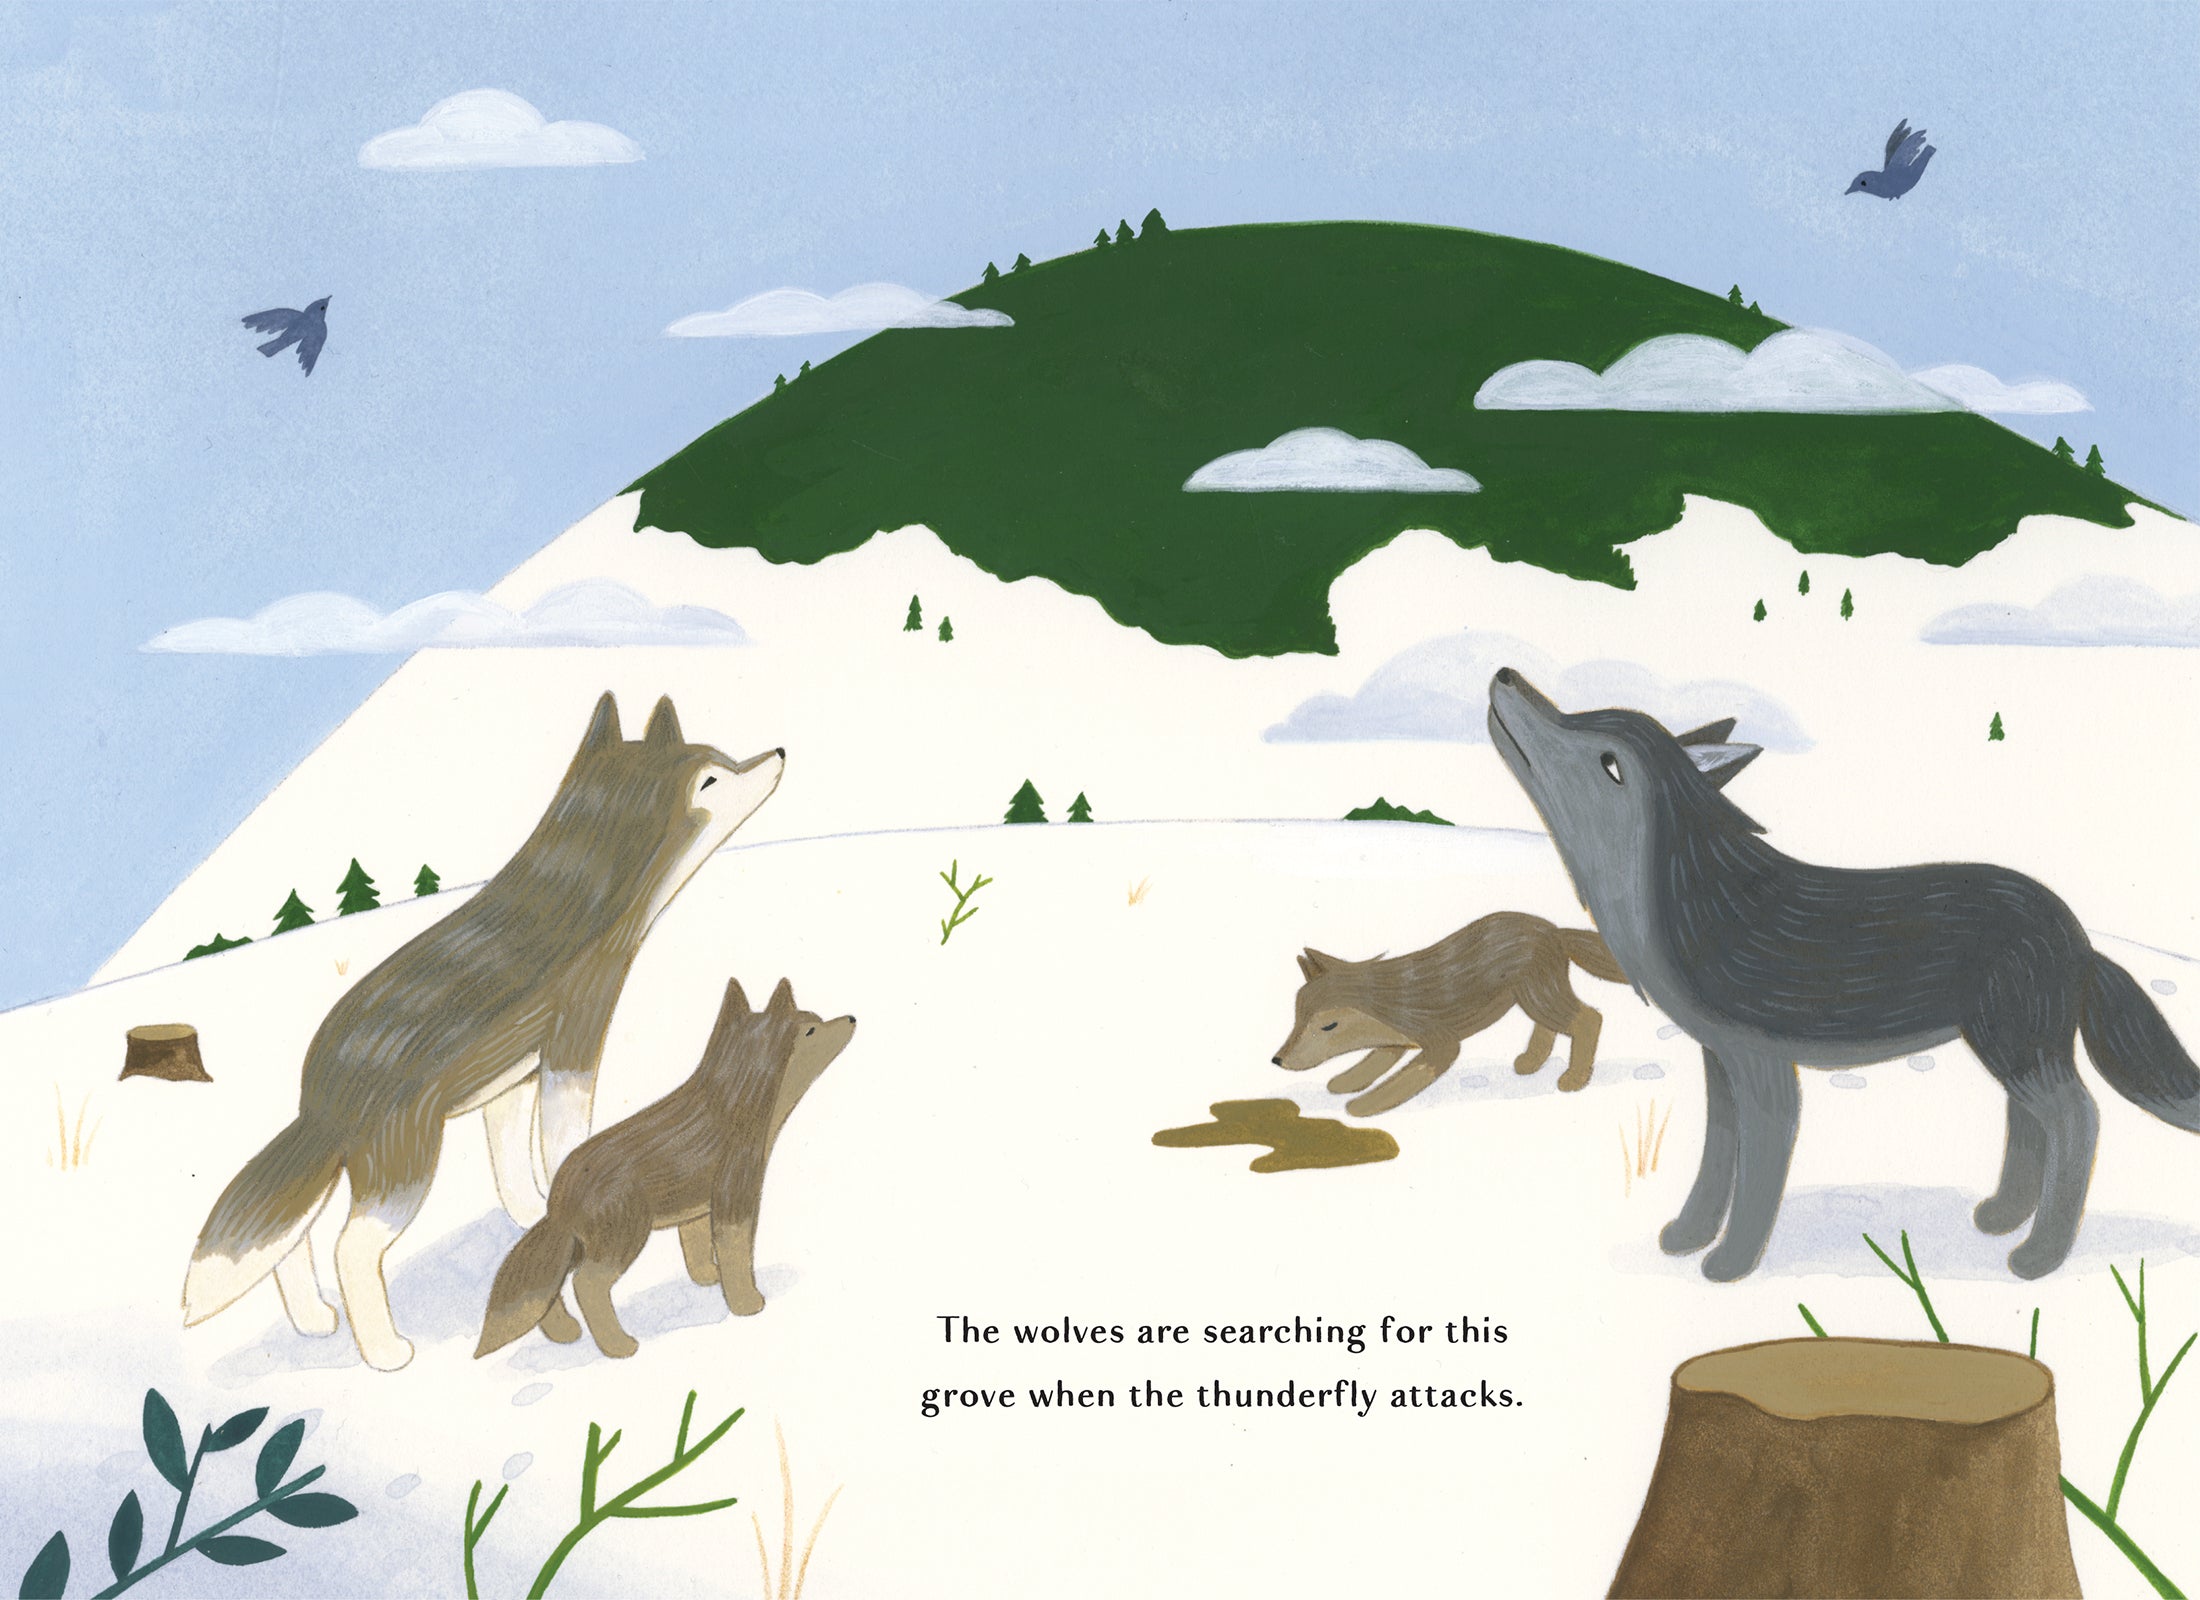 Spur, a Wolf's Story